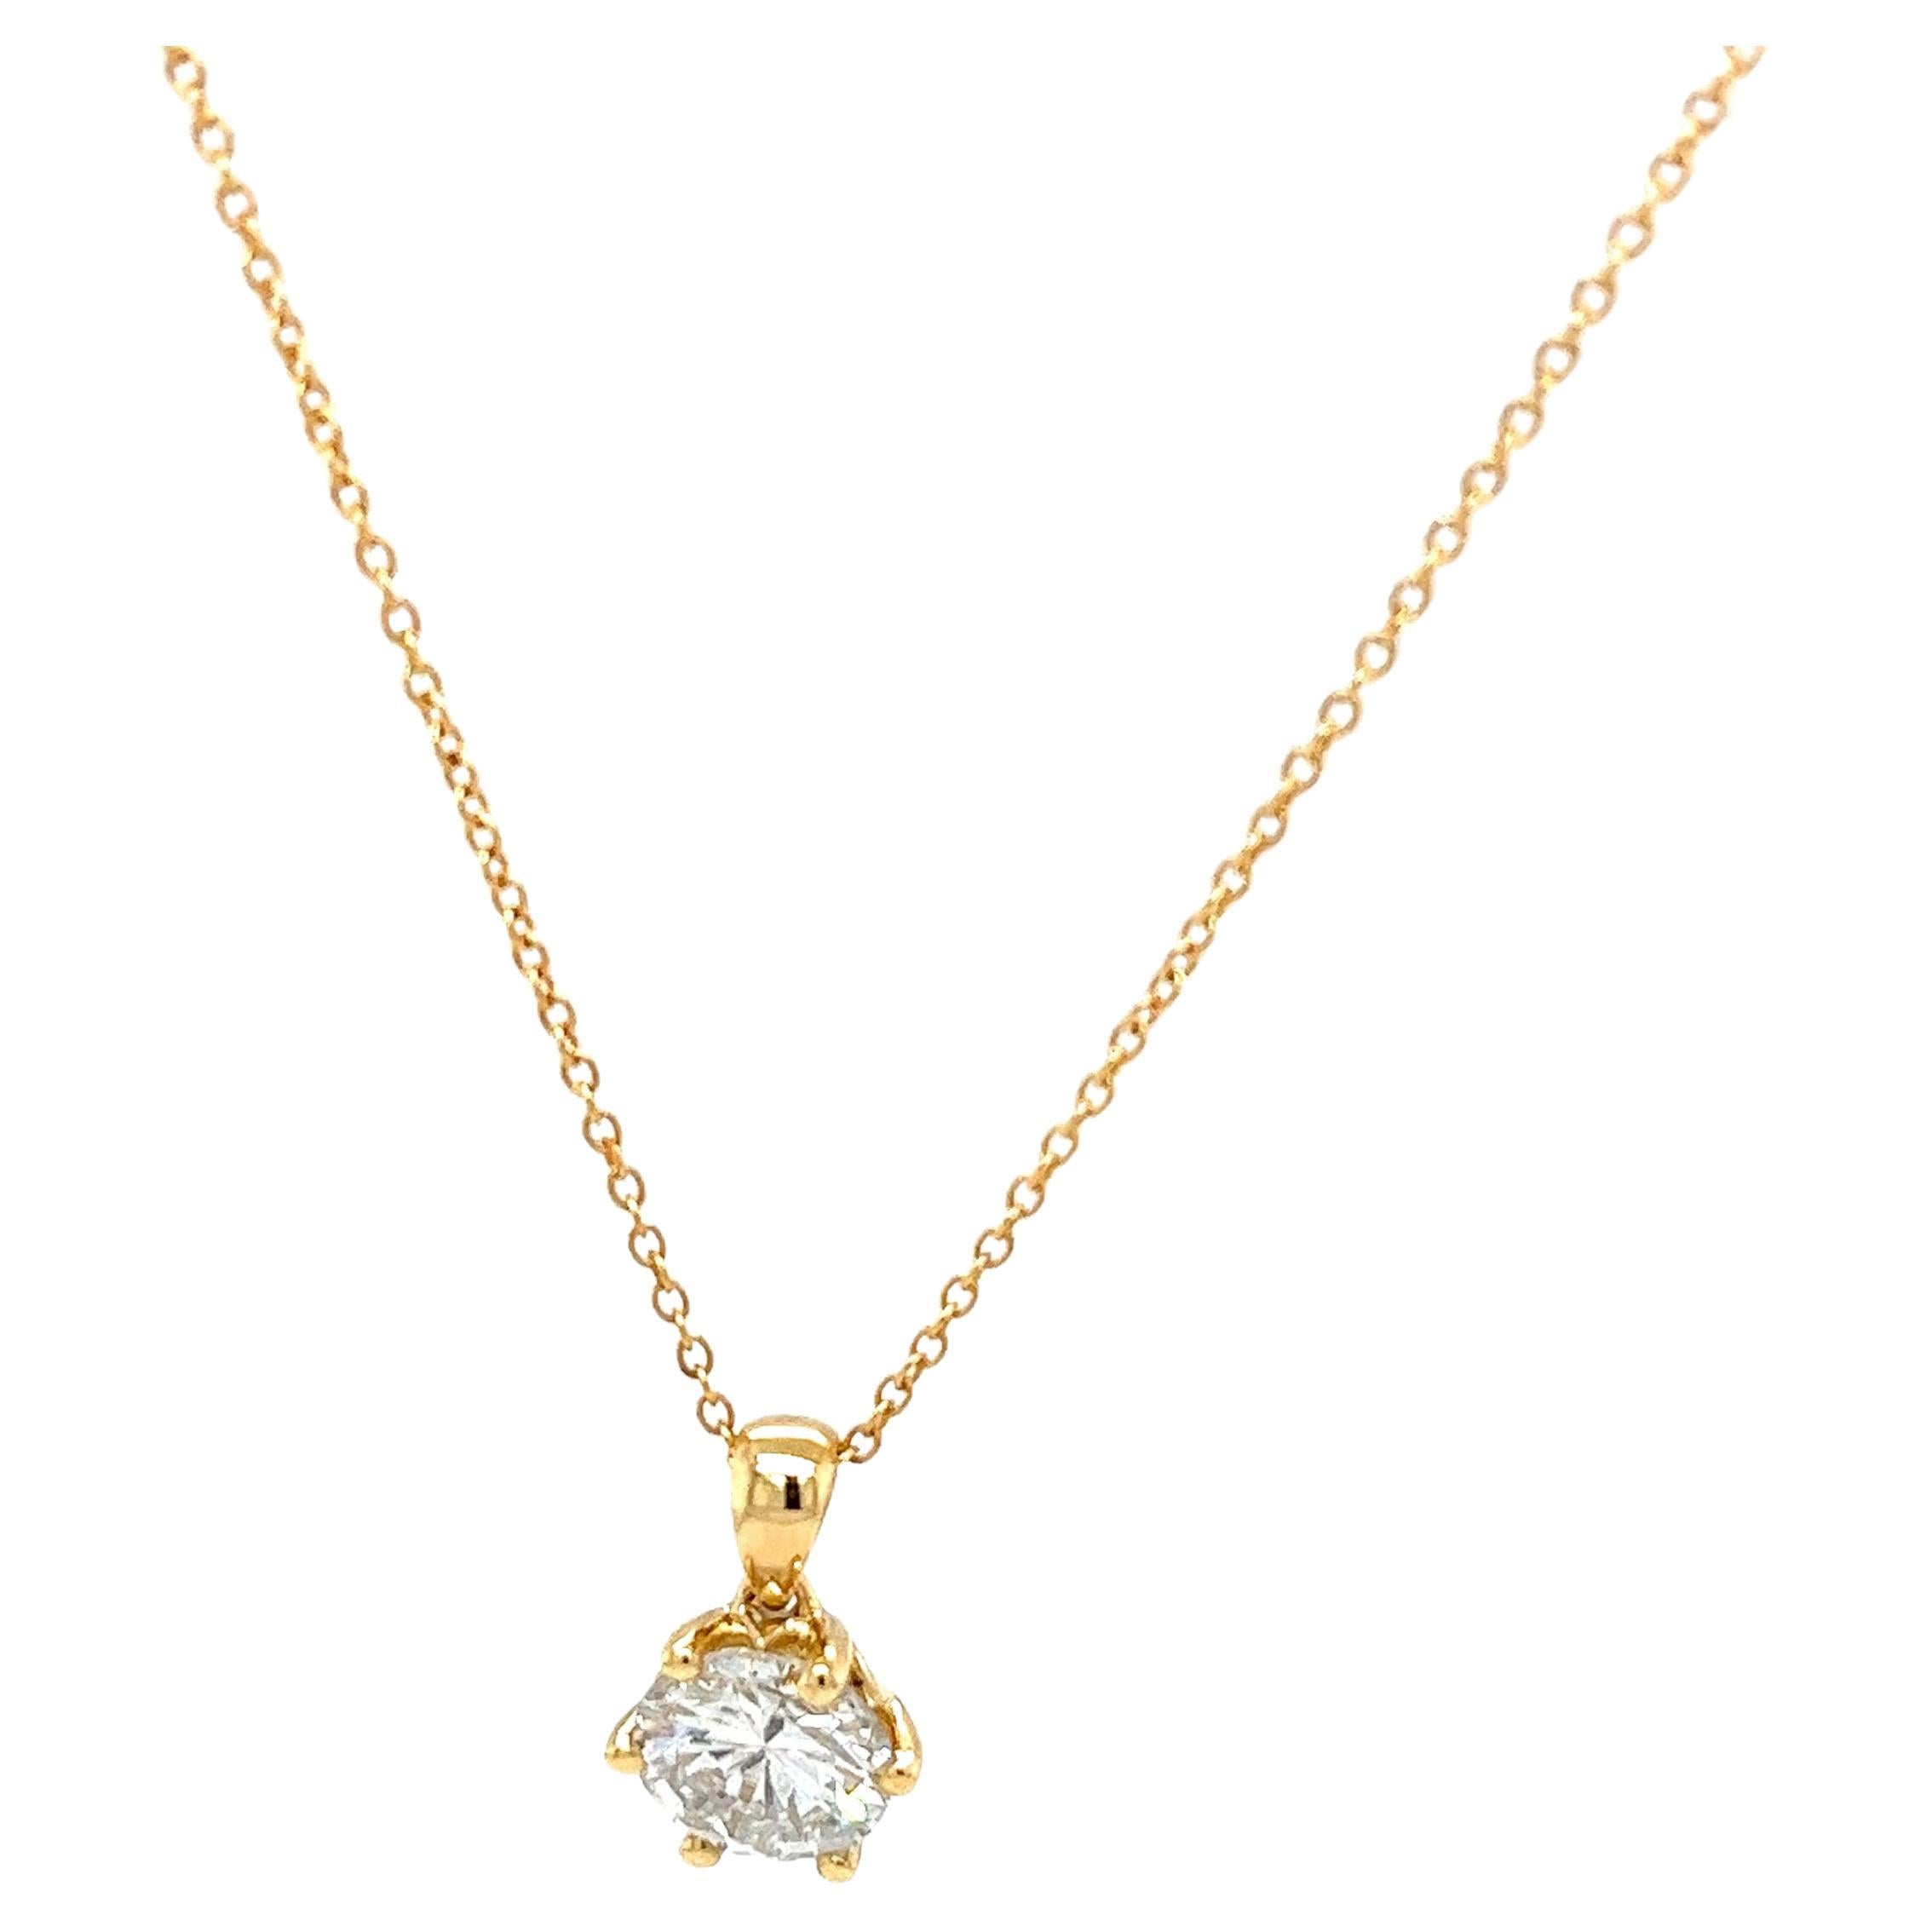 The necklace 18ct yellow gold chain is designed to hold 
the pendant at the center of the chest,
set with 1 round brilliant cut diamond 1.26ct F/SI3 EDR certified
making it a very elegant and beautiful piece of jewellery. 
Total Diamond Weight: